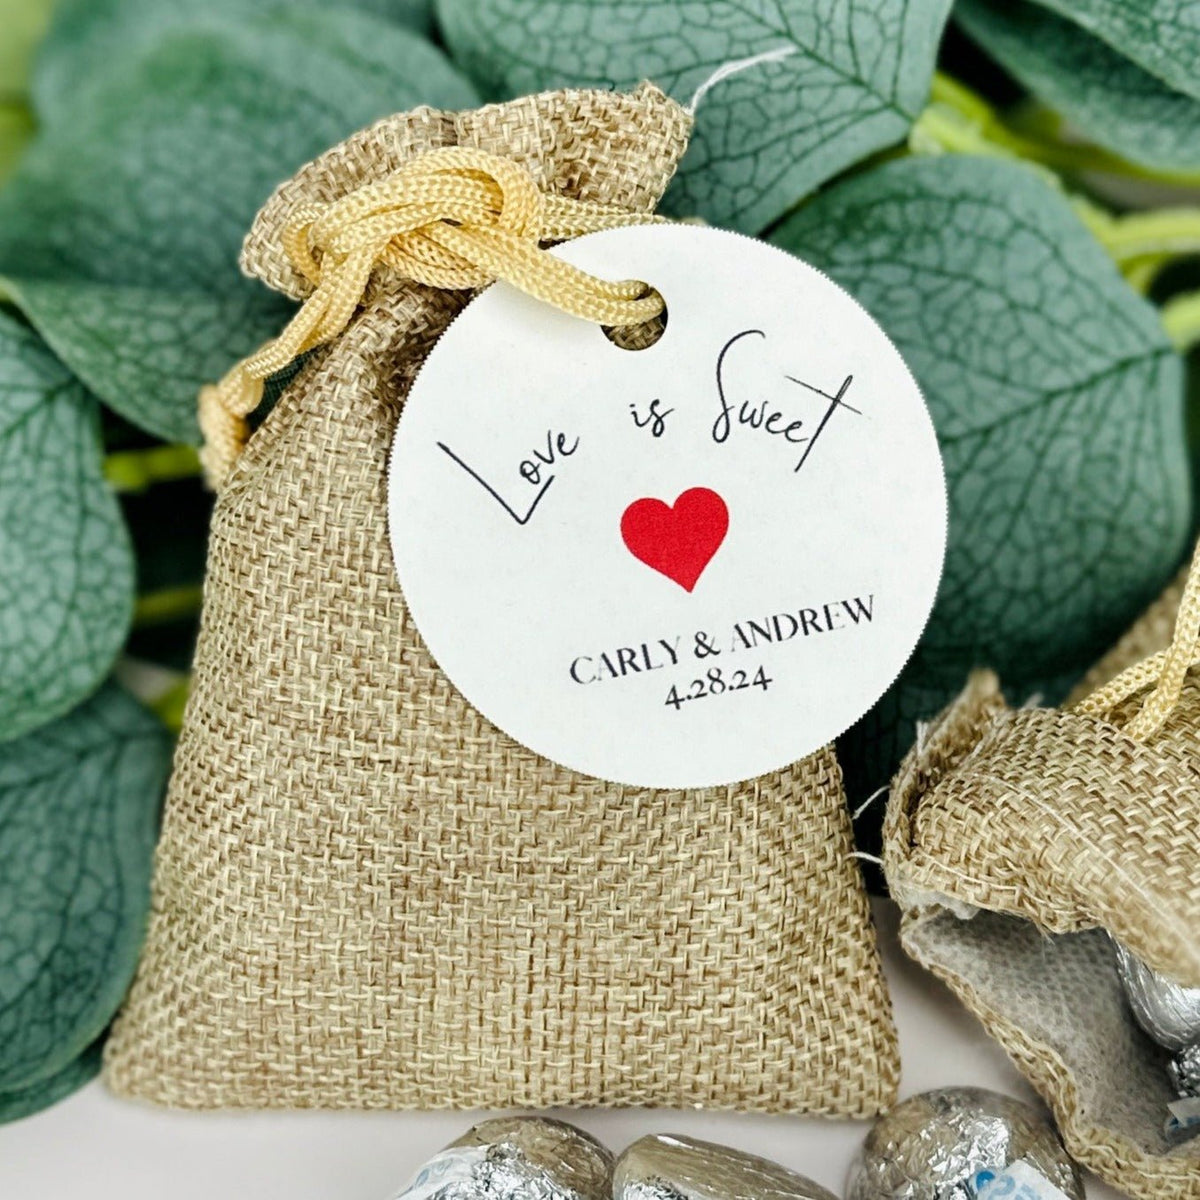 Love Is Sweet Tag - Forever Wedding Favors